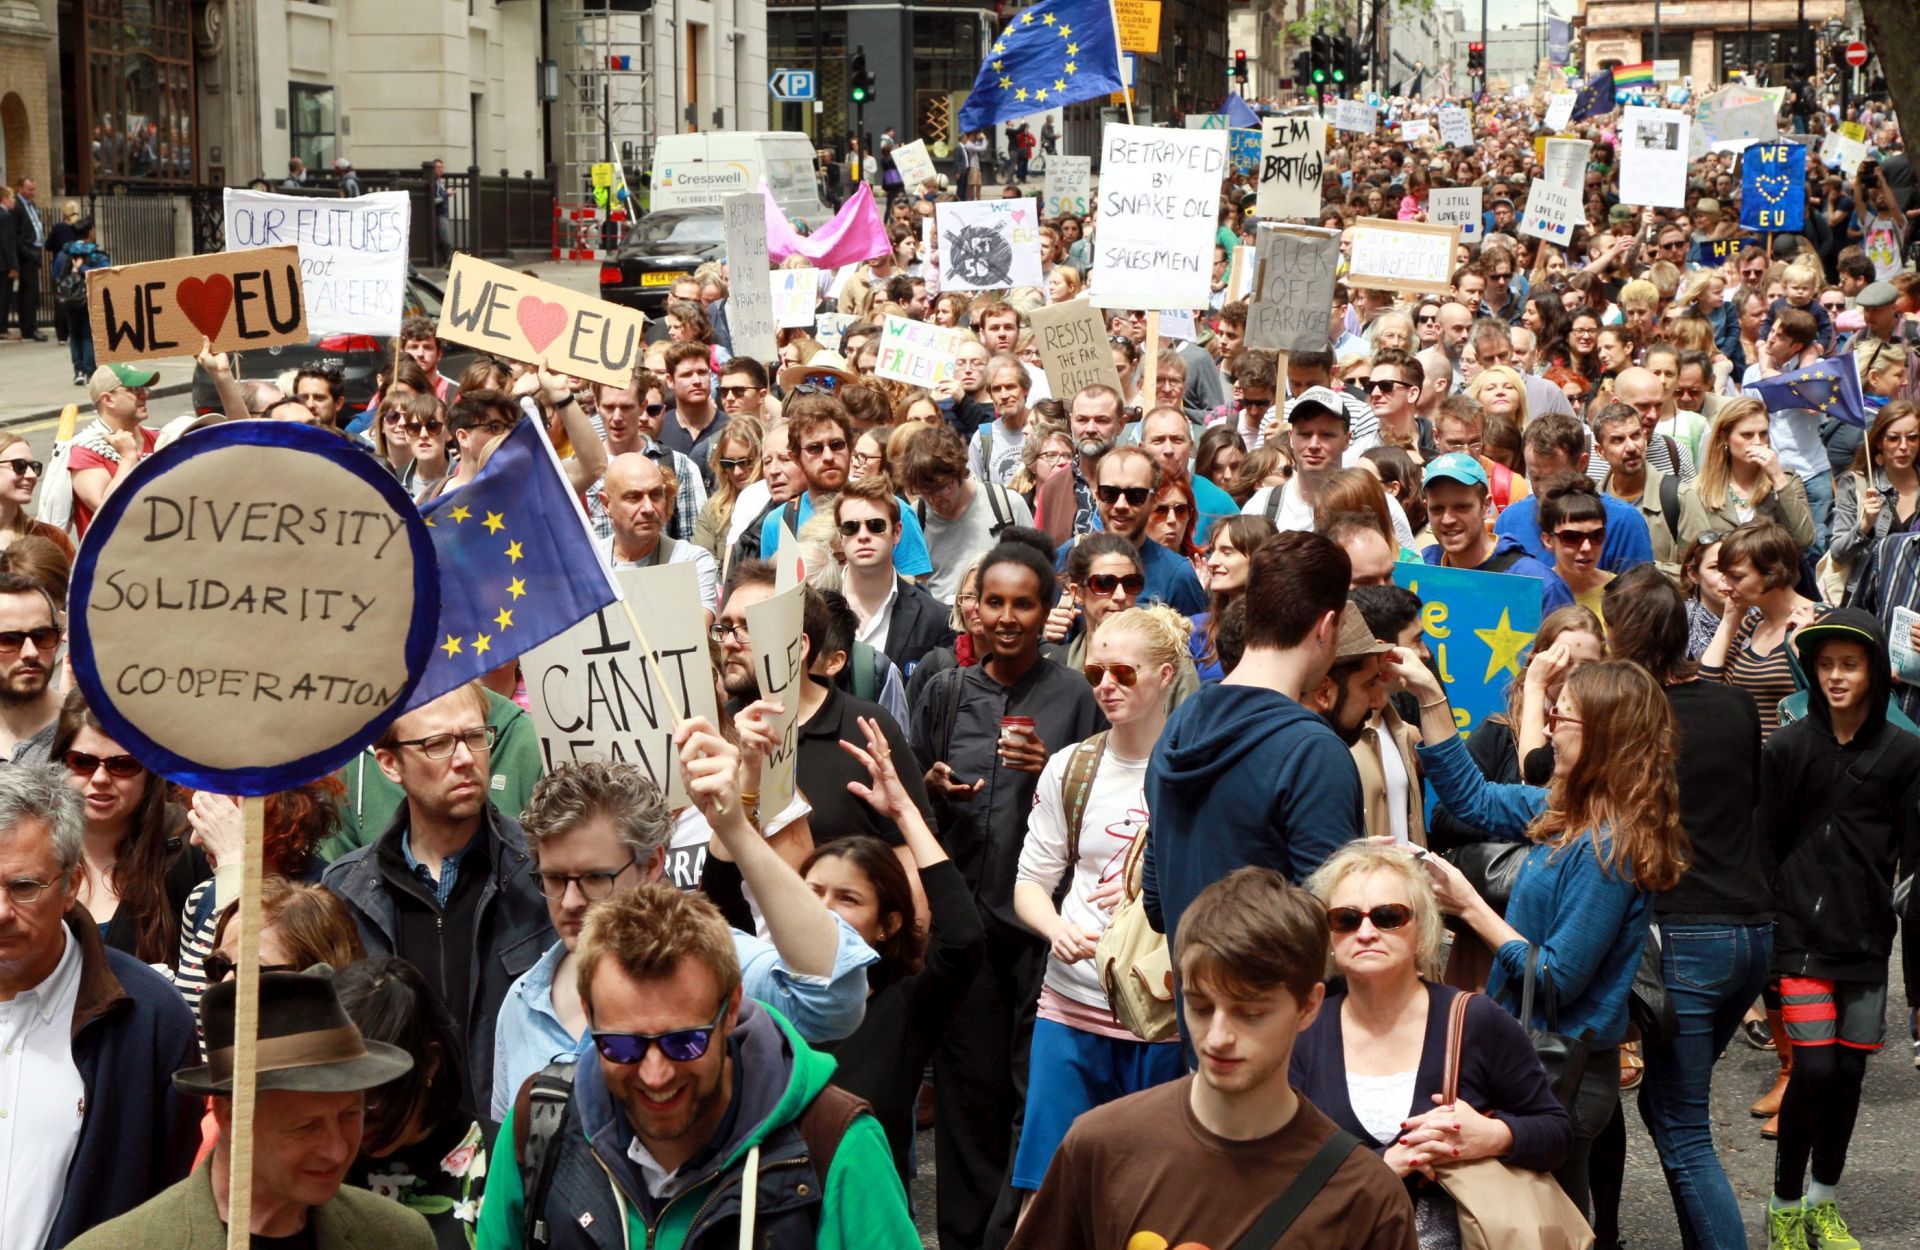 epa05403304 People take part in A March for Europe from Park Lane to Parliament Square in Westminster, central London, Britain, 02 July 2016. Thousands of people wishing Britain to remain a member of the EU have joined the 'March for Europe' rally, which was organised on social media.  EPA/SEAN DEMPSEY